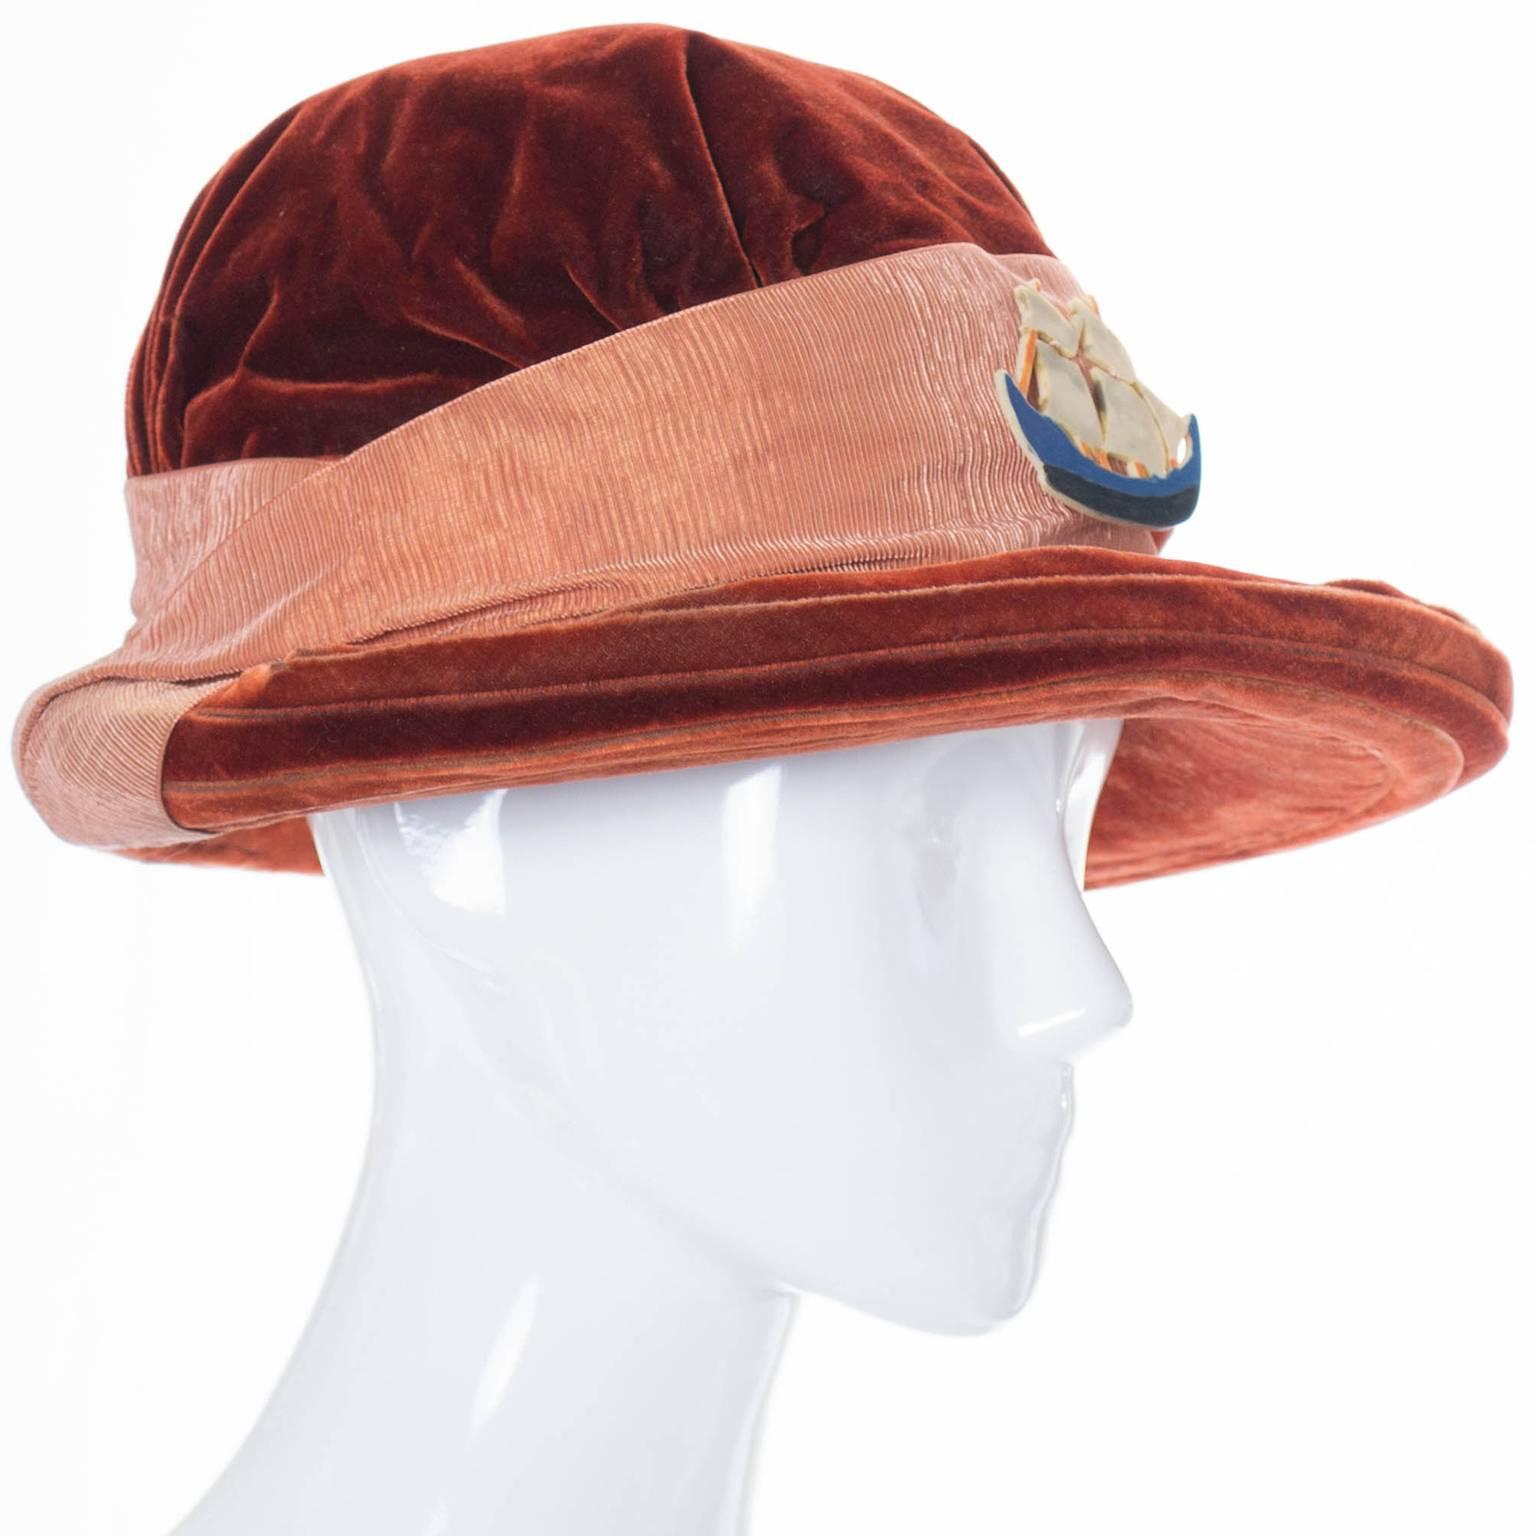 This is a fabulous antique copper velvet vintage hat from the earlier part of the 20th century. Wide brim with silk grosgrain ribbon and an amazing ship! This collectible Edwardian hat has a label that reads; By Regina 